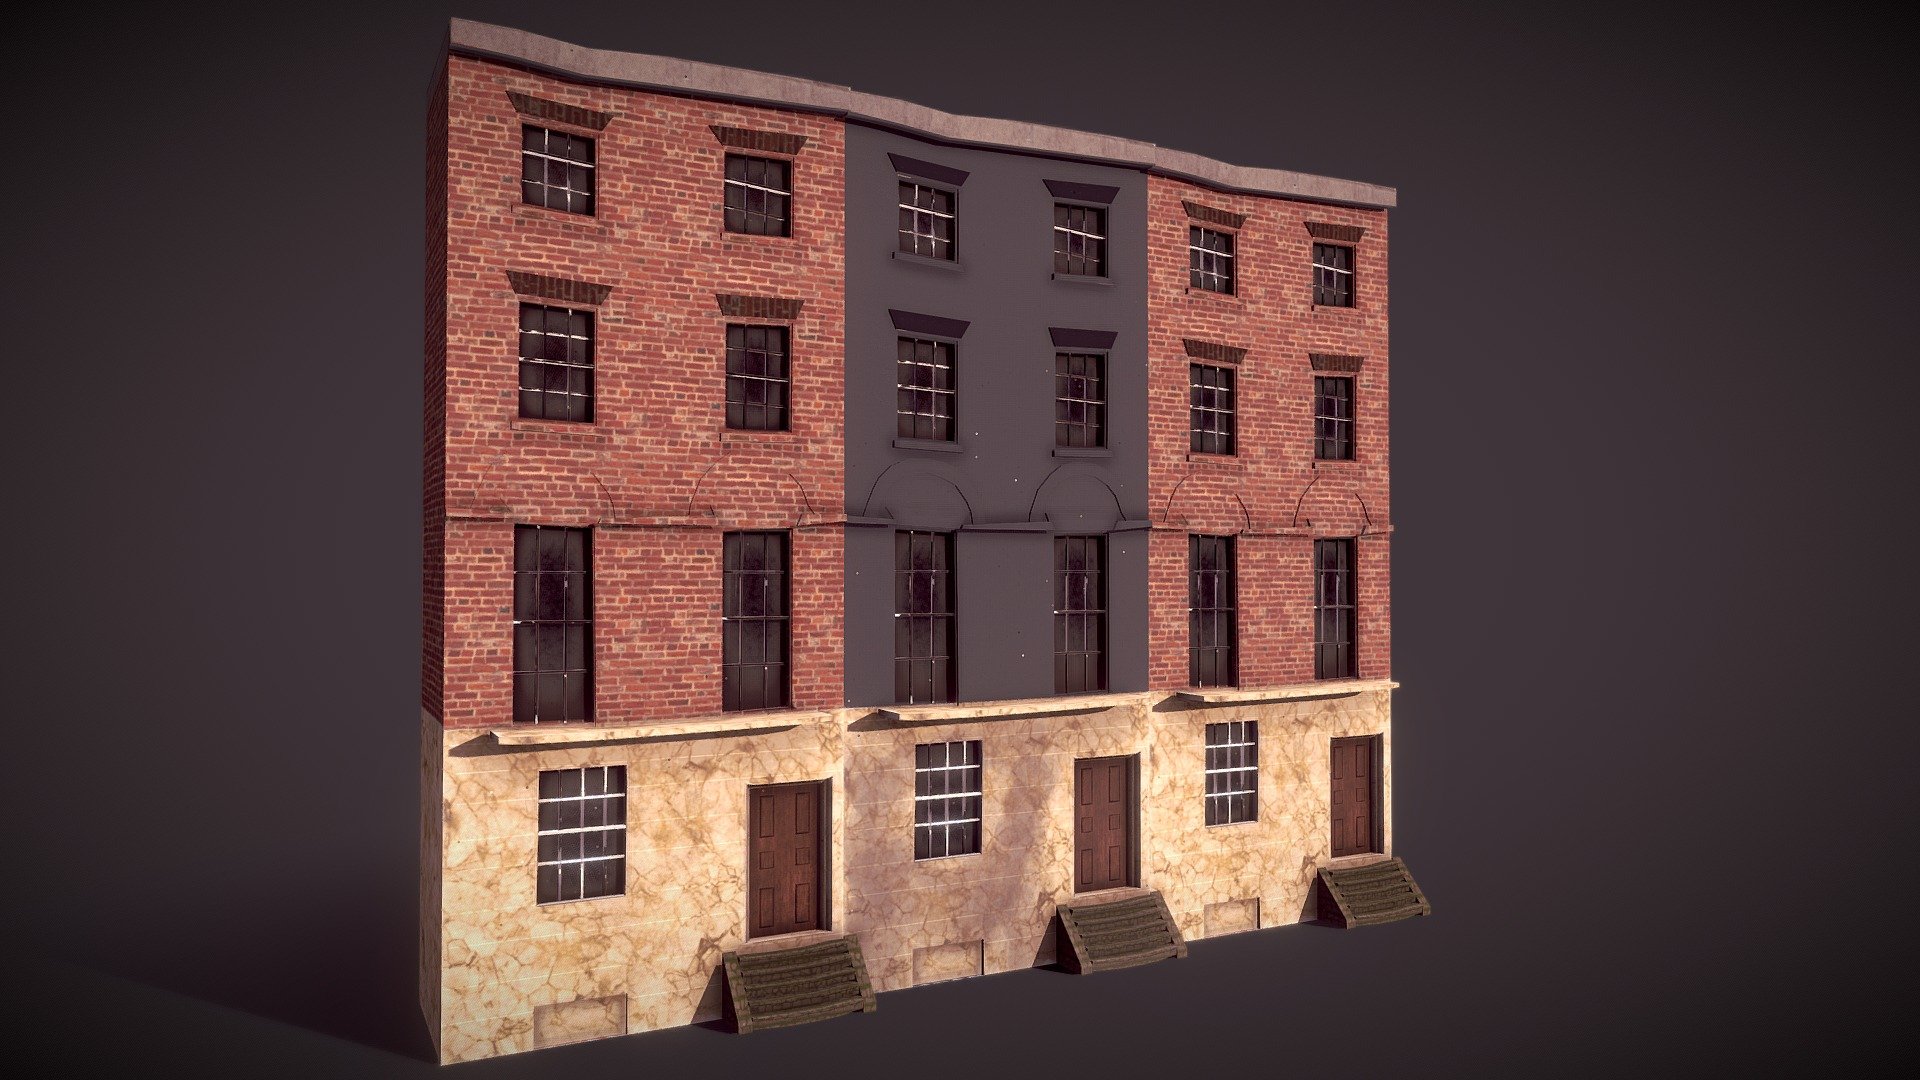 Here i have recreated 12 grimmauld place from my old harry potter stuff i did in college. i have done this to test some stuff that i want to domin uni next semester and the ideas that i had worked out

Overall this took about 4 hours to make using Maybe, Sub paint and Zbrush - 12 Grimmauld place - Harry Potter - Buy Royalty Free 3D model by The Moyai (@Eagger) 3d model